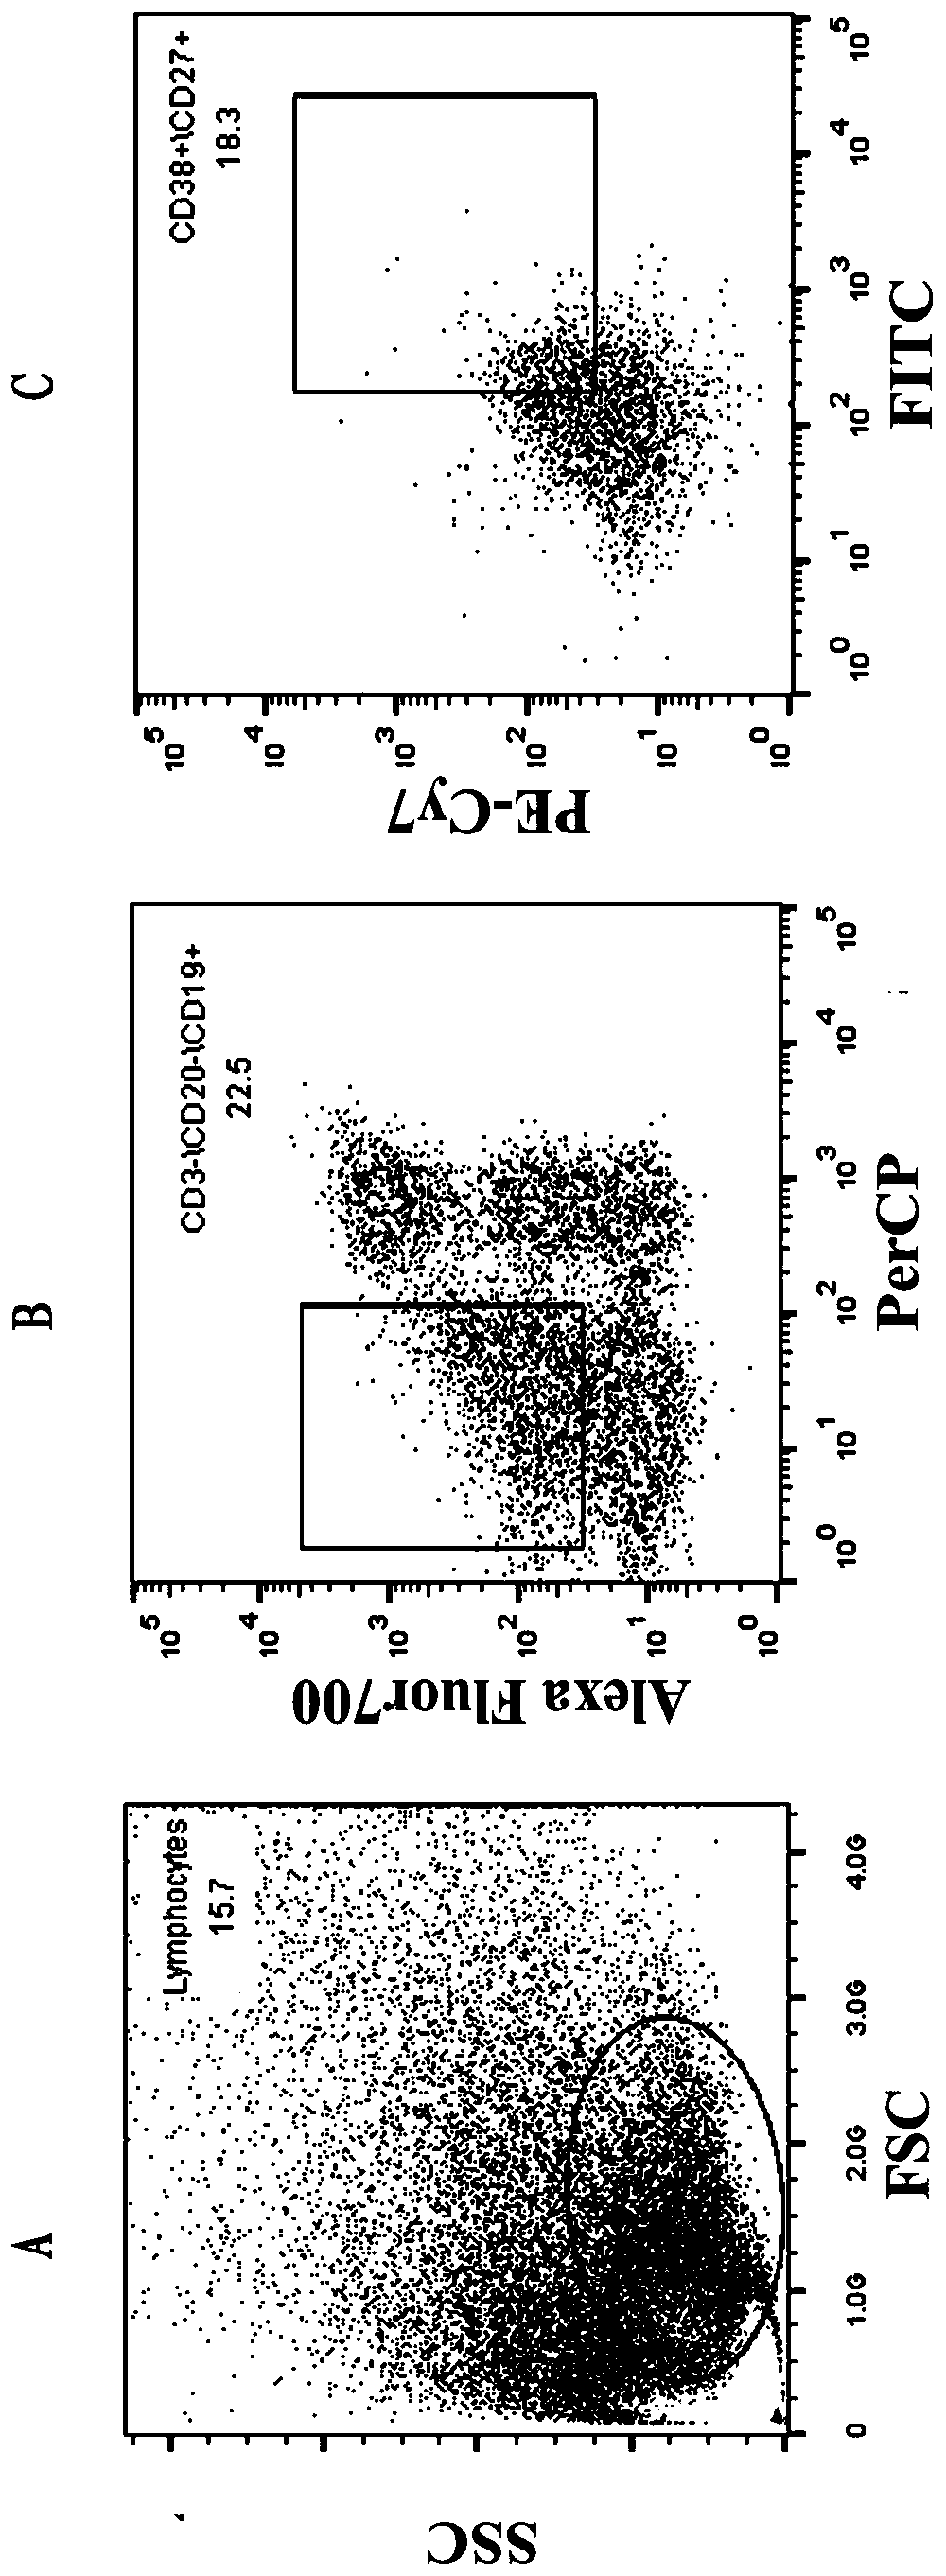 High-neutralizing-activity anti-SARS-CoV-2 fully-humanized monoclonal antibody and application thereof